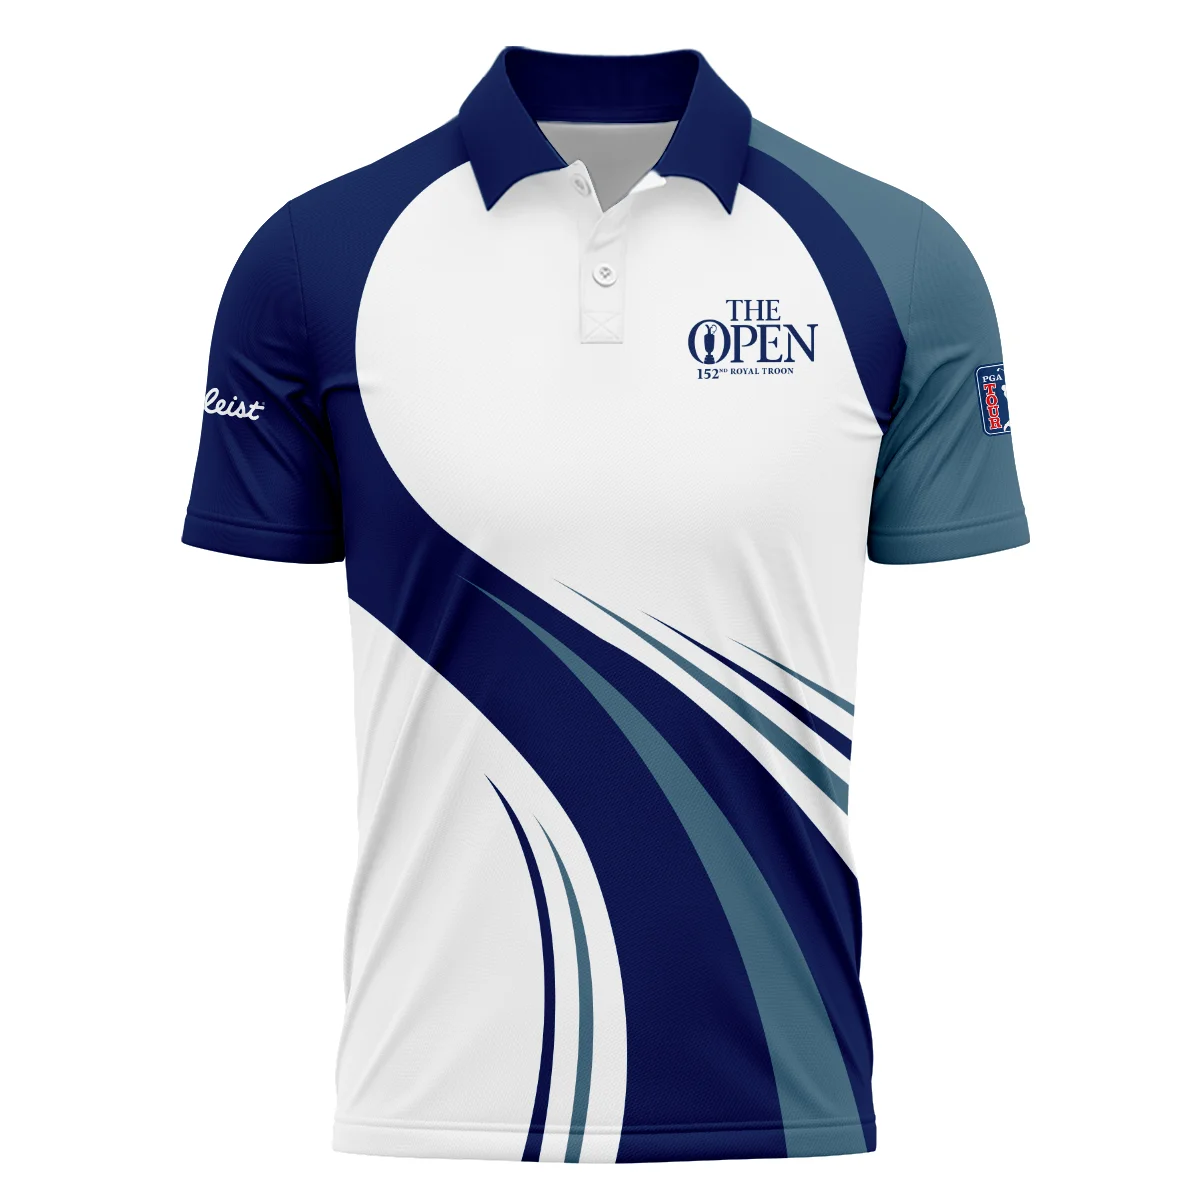 152nd Open Championship Titleist White Mostly Desaturated Dark Blue Polo Shirt All Over Prints HOTOP270624A02TLPL